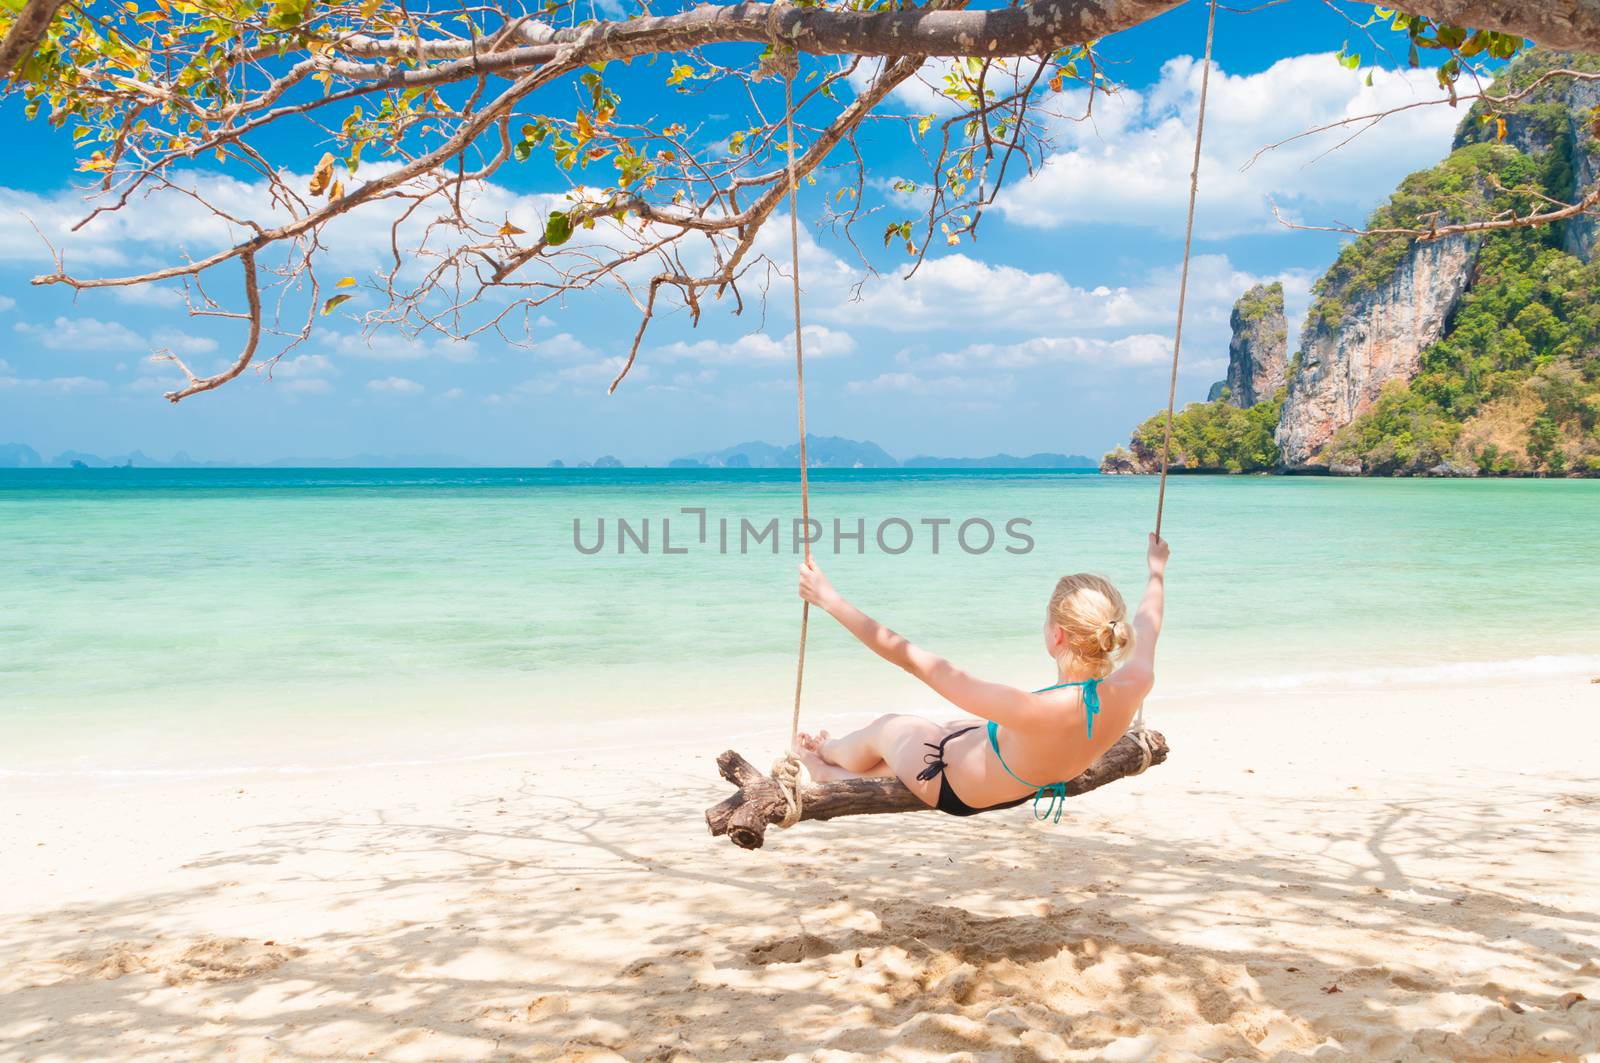 Lady swinging on the tropical beach by kasto